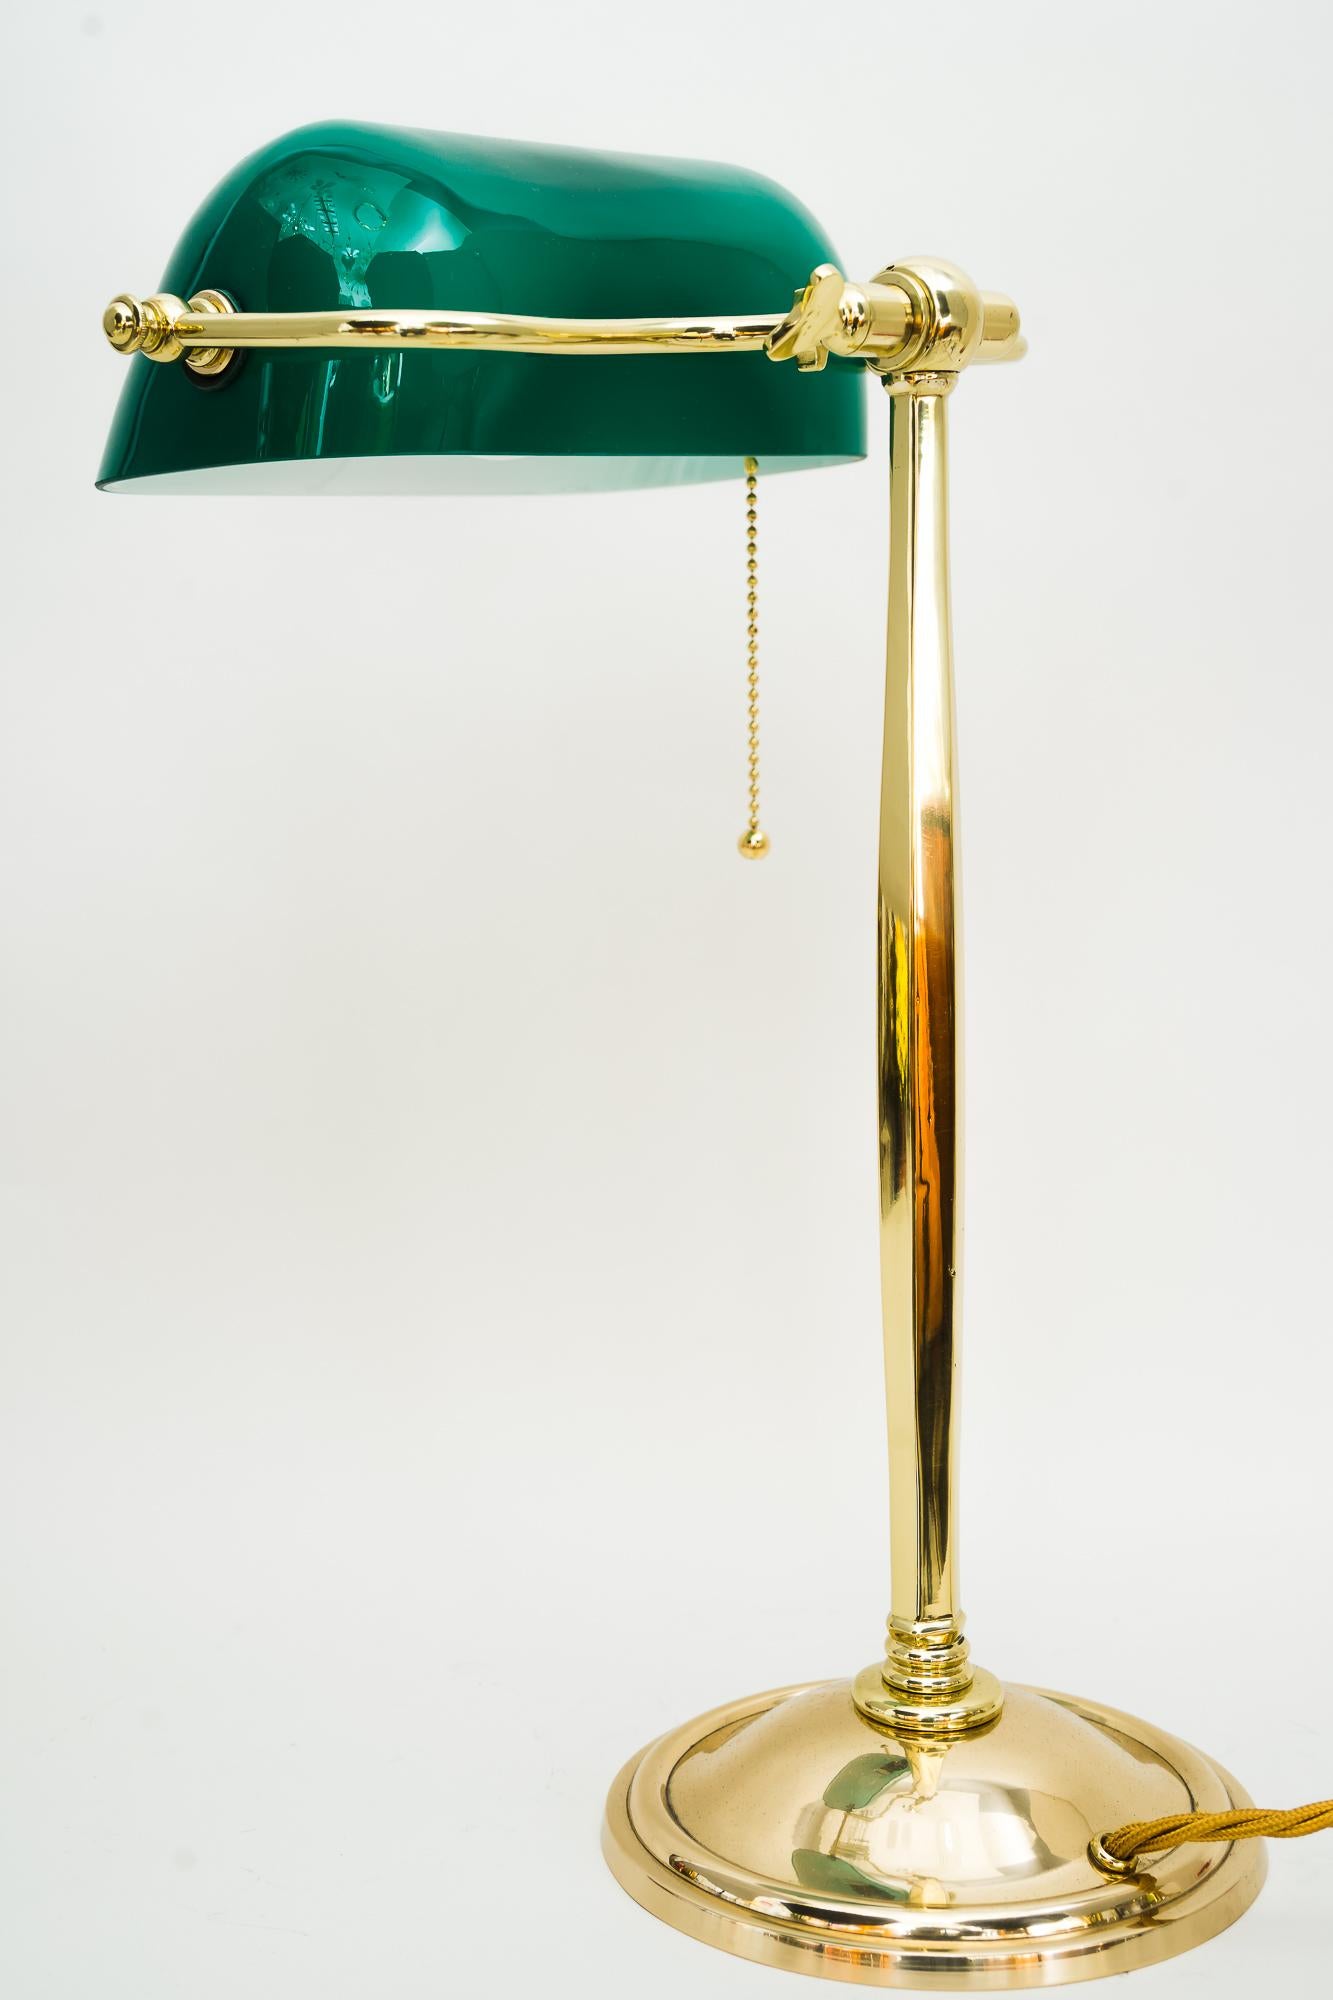 Rare Art Deco table lamp with original glass shade vienna around 1920s
Polished and stove enamelled
Original glass shade
The hight is adjustable from low 40cm ( 44cm middle position ) up to 56cm.